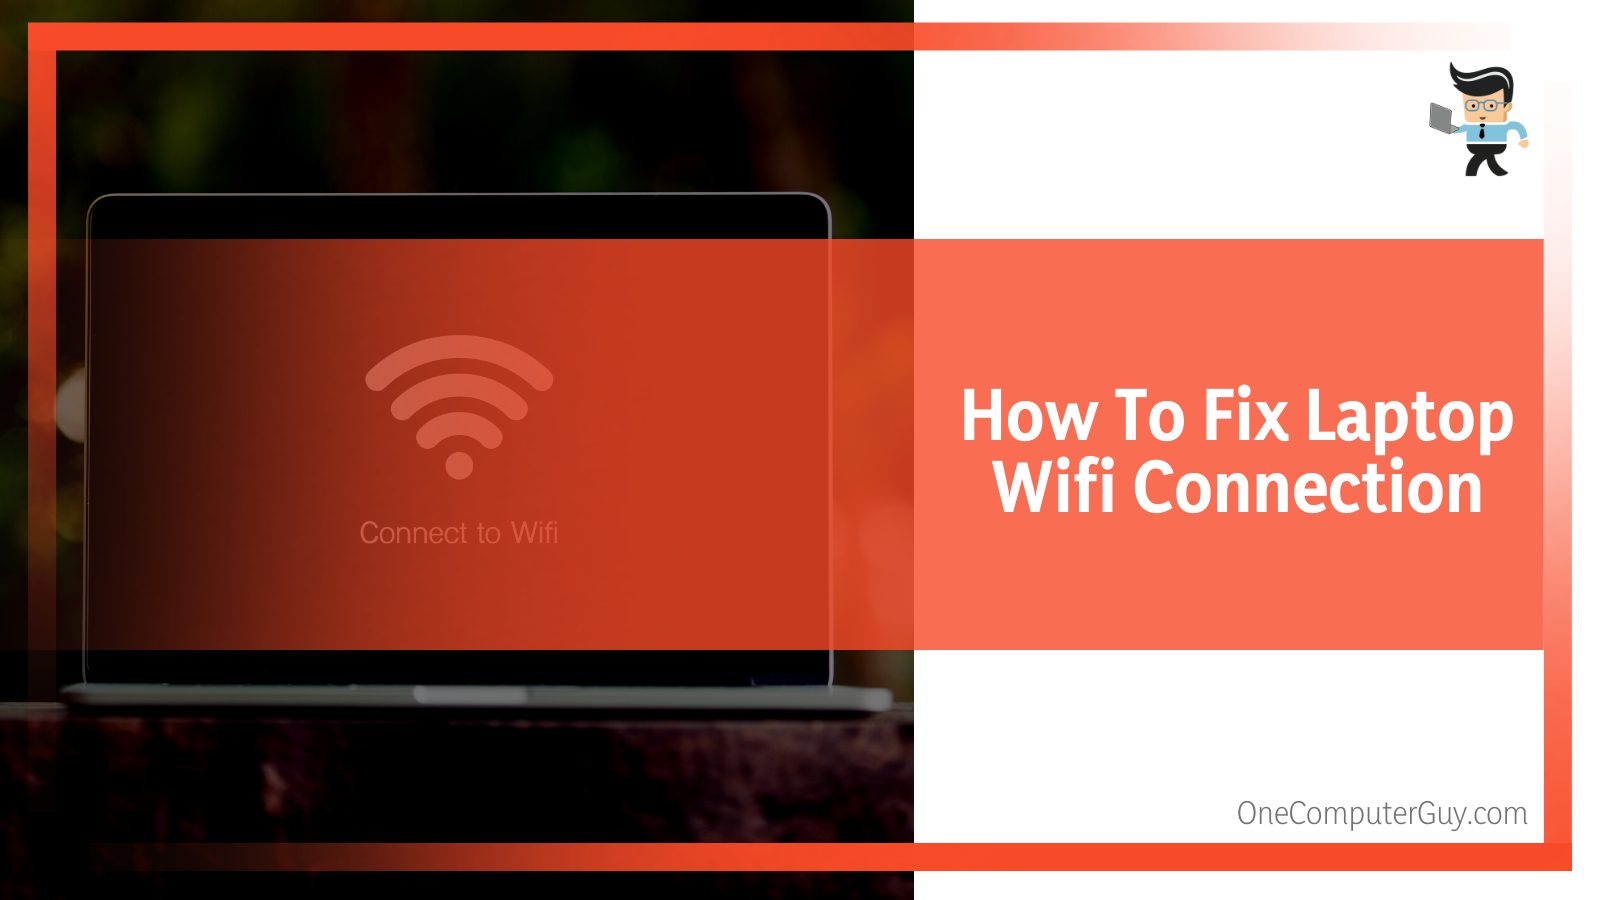 How To Fix Laptop Wifi connection